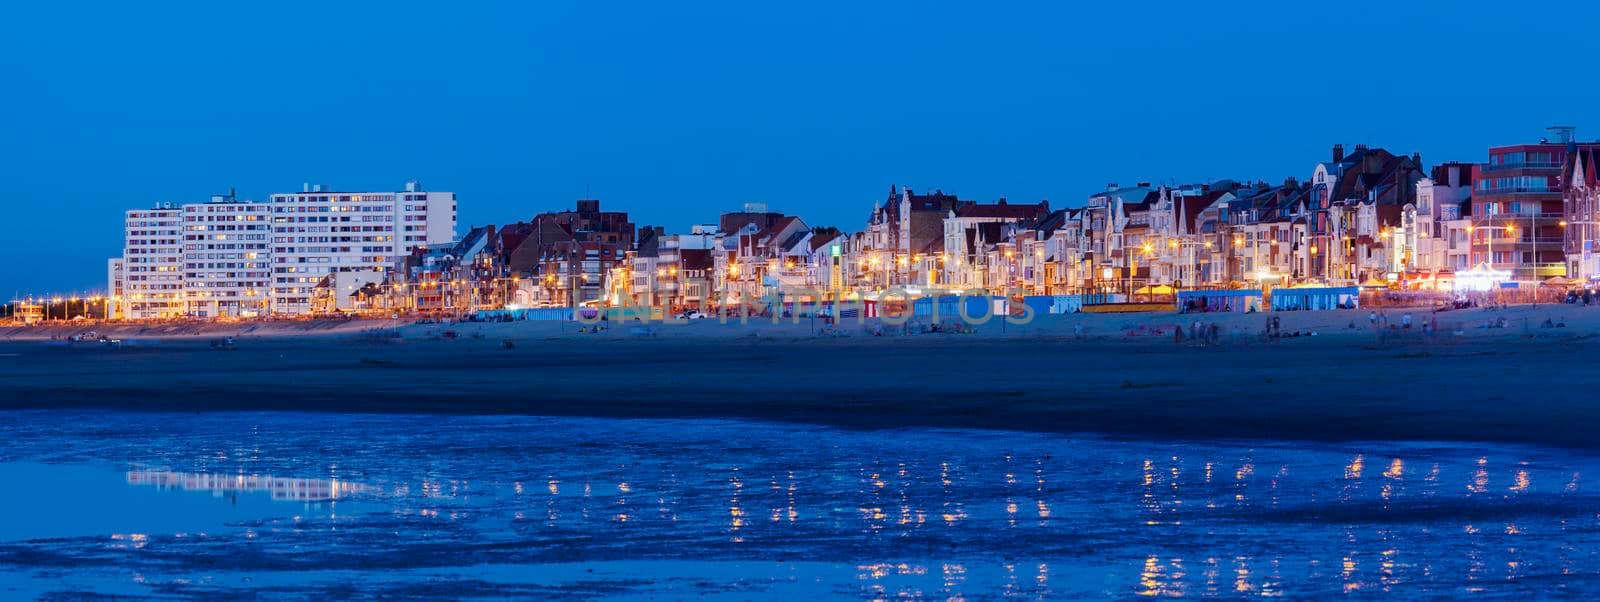 Panorama of Dunkirk from the beach. Dunkirk, Hauts-de-France, France.